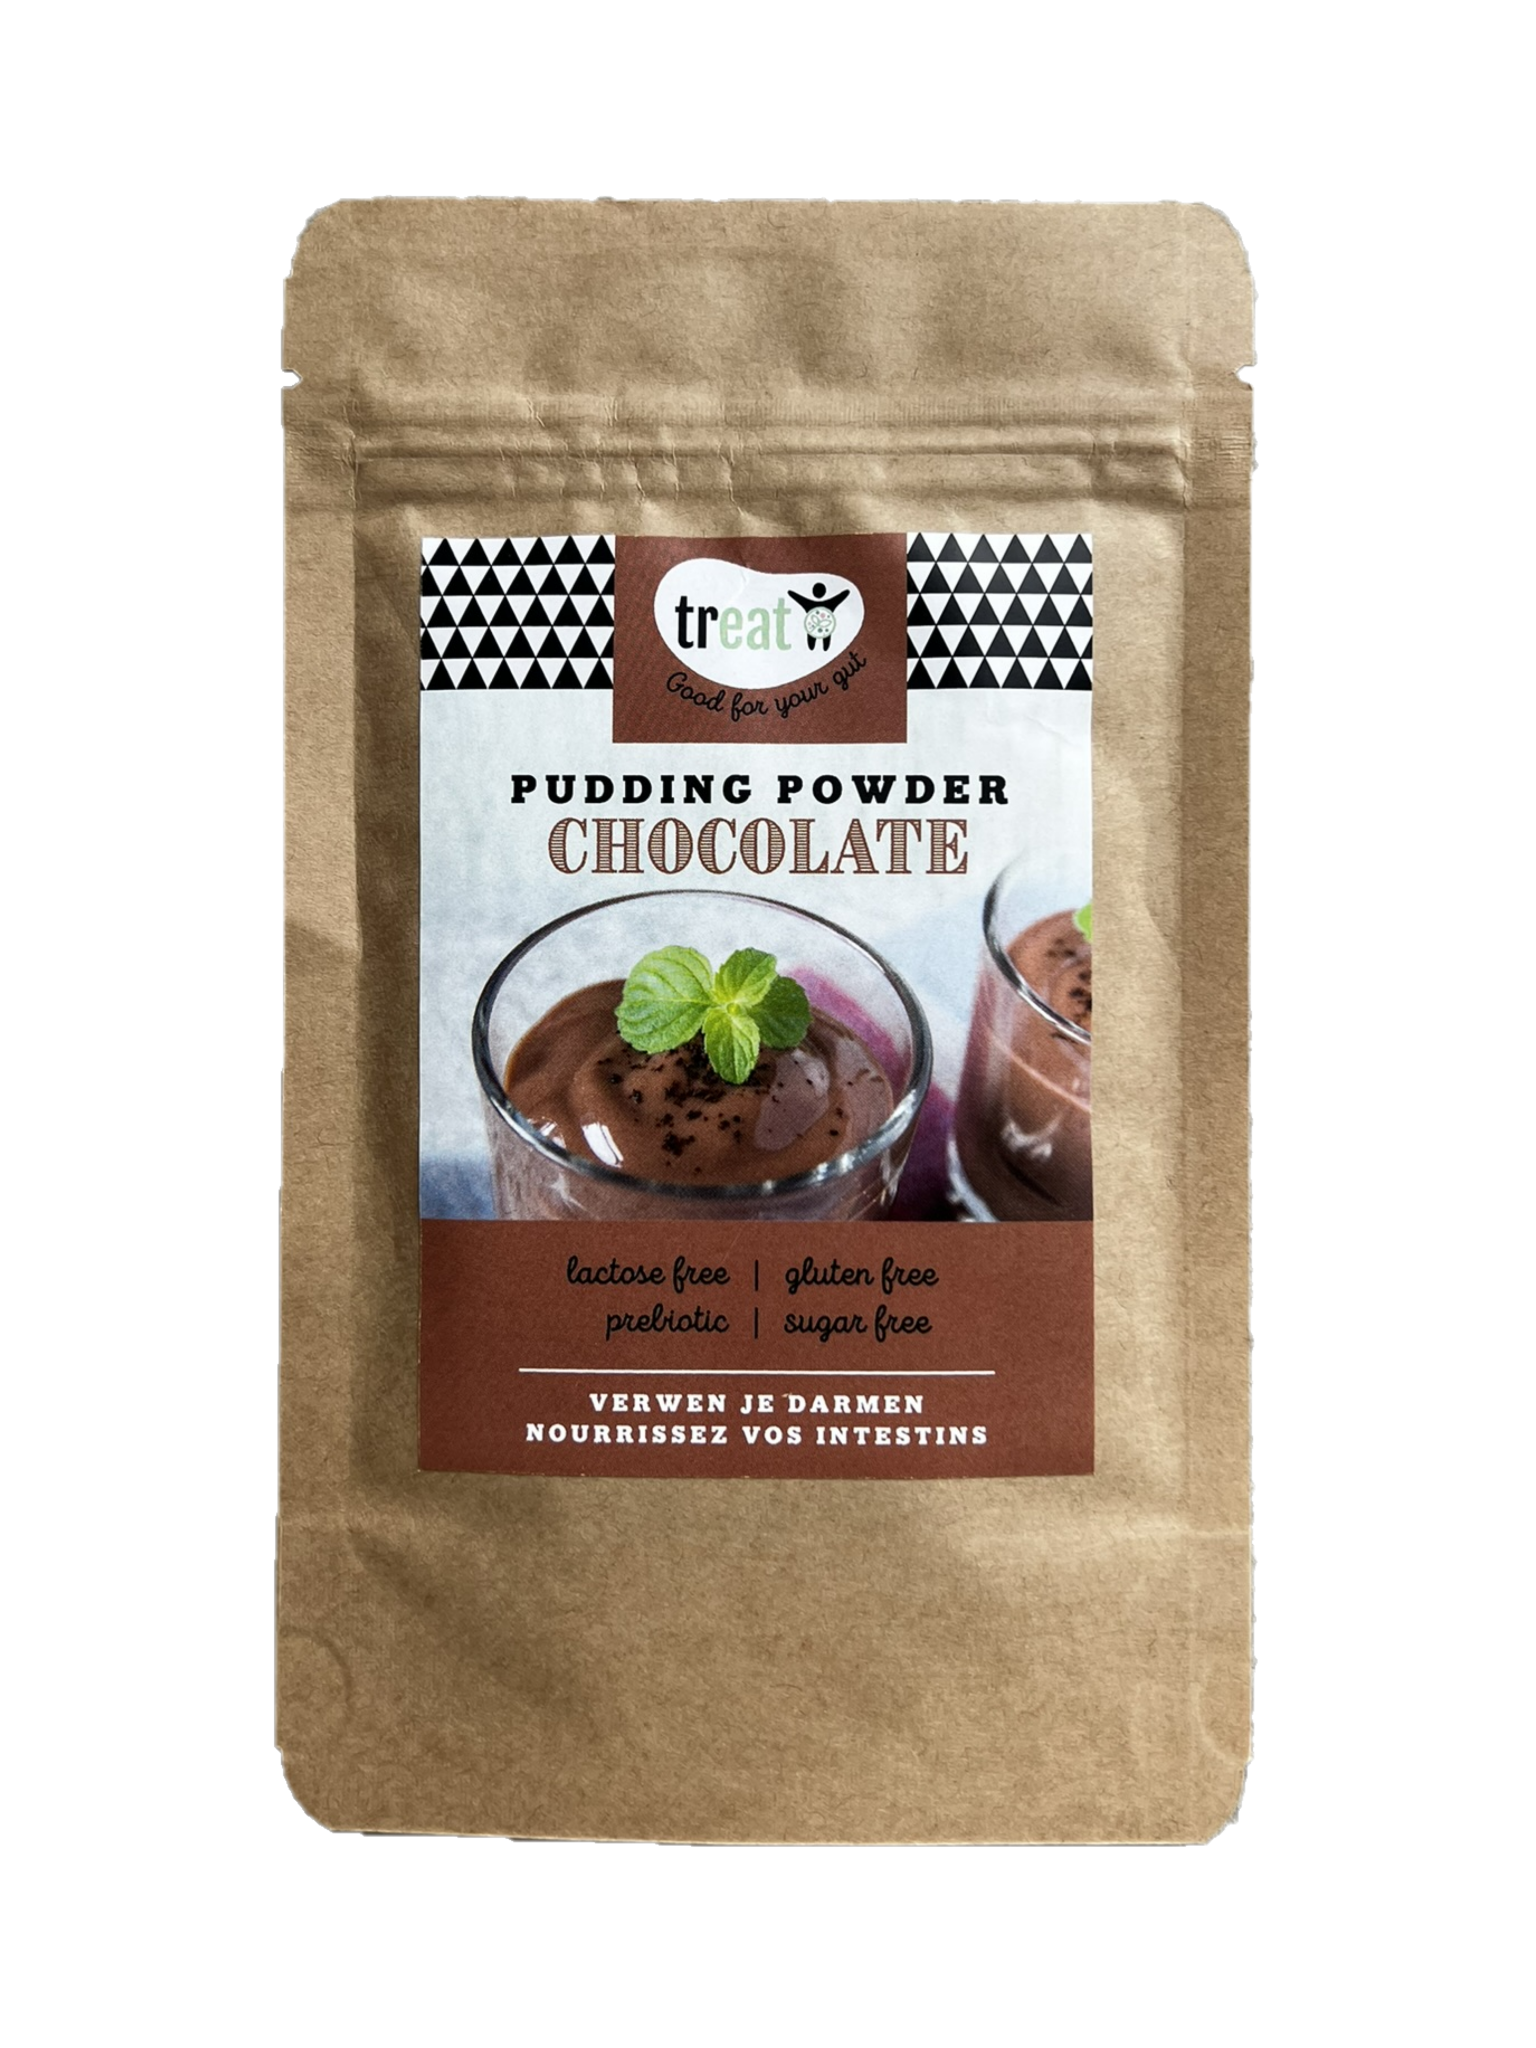 A pack of  TREAT Pudding Powder Chocolate